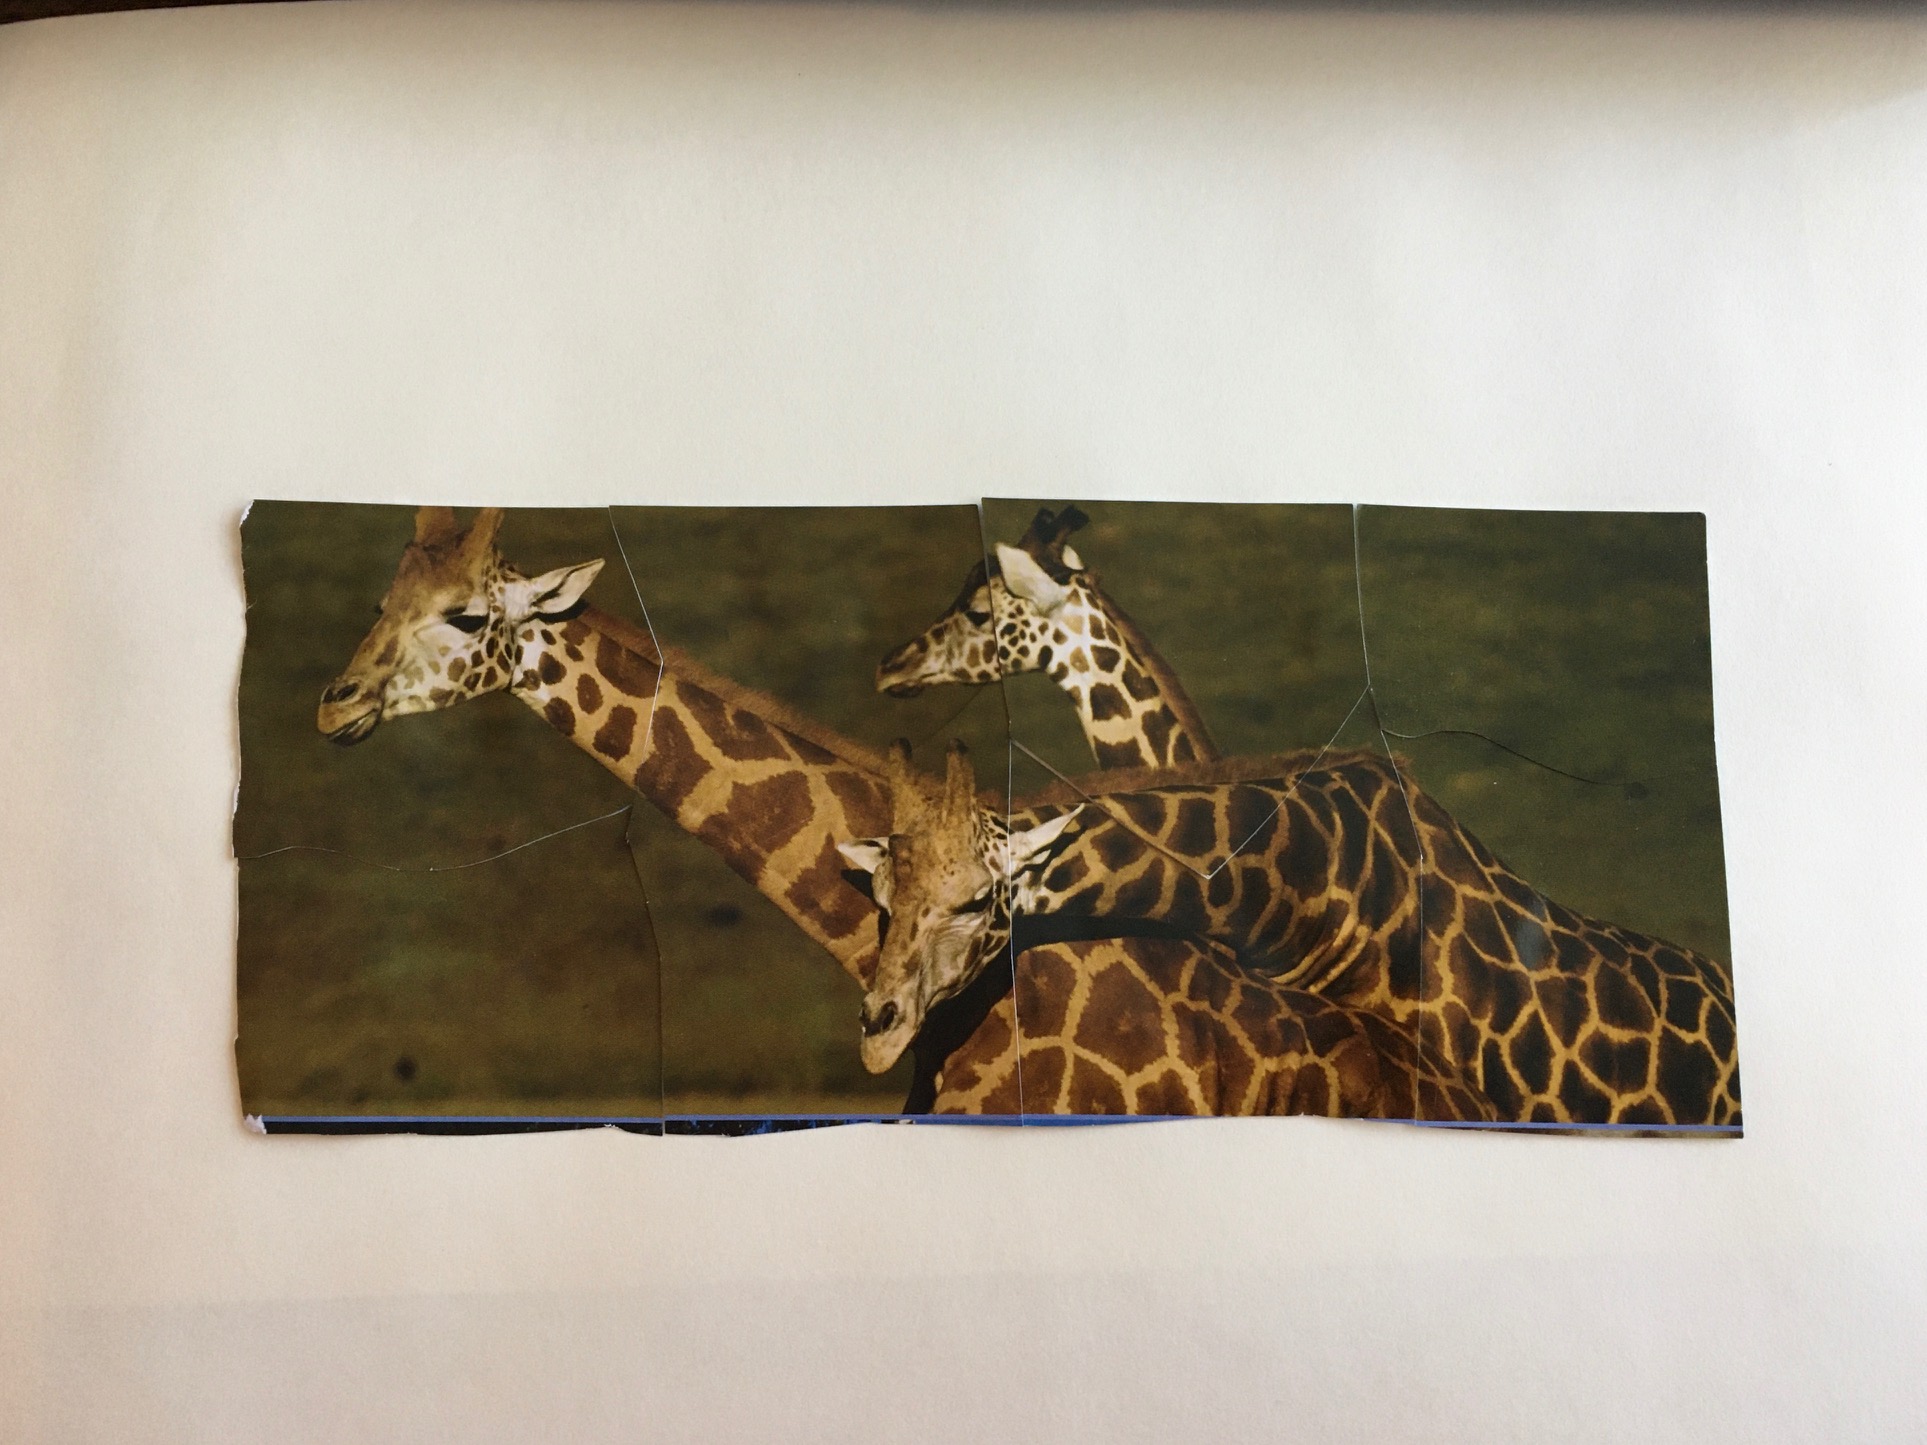 A small puzzle depicting three giraffes